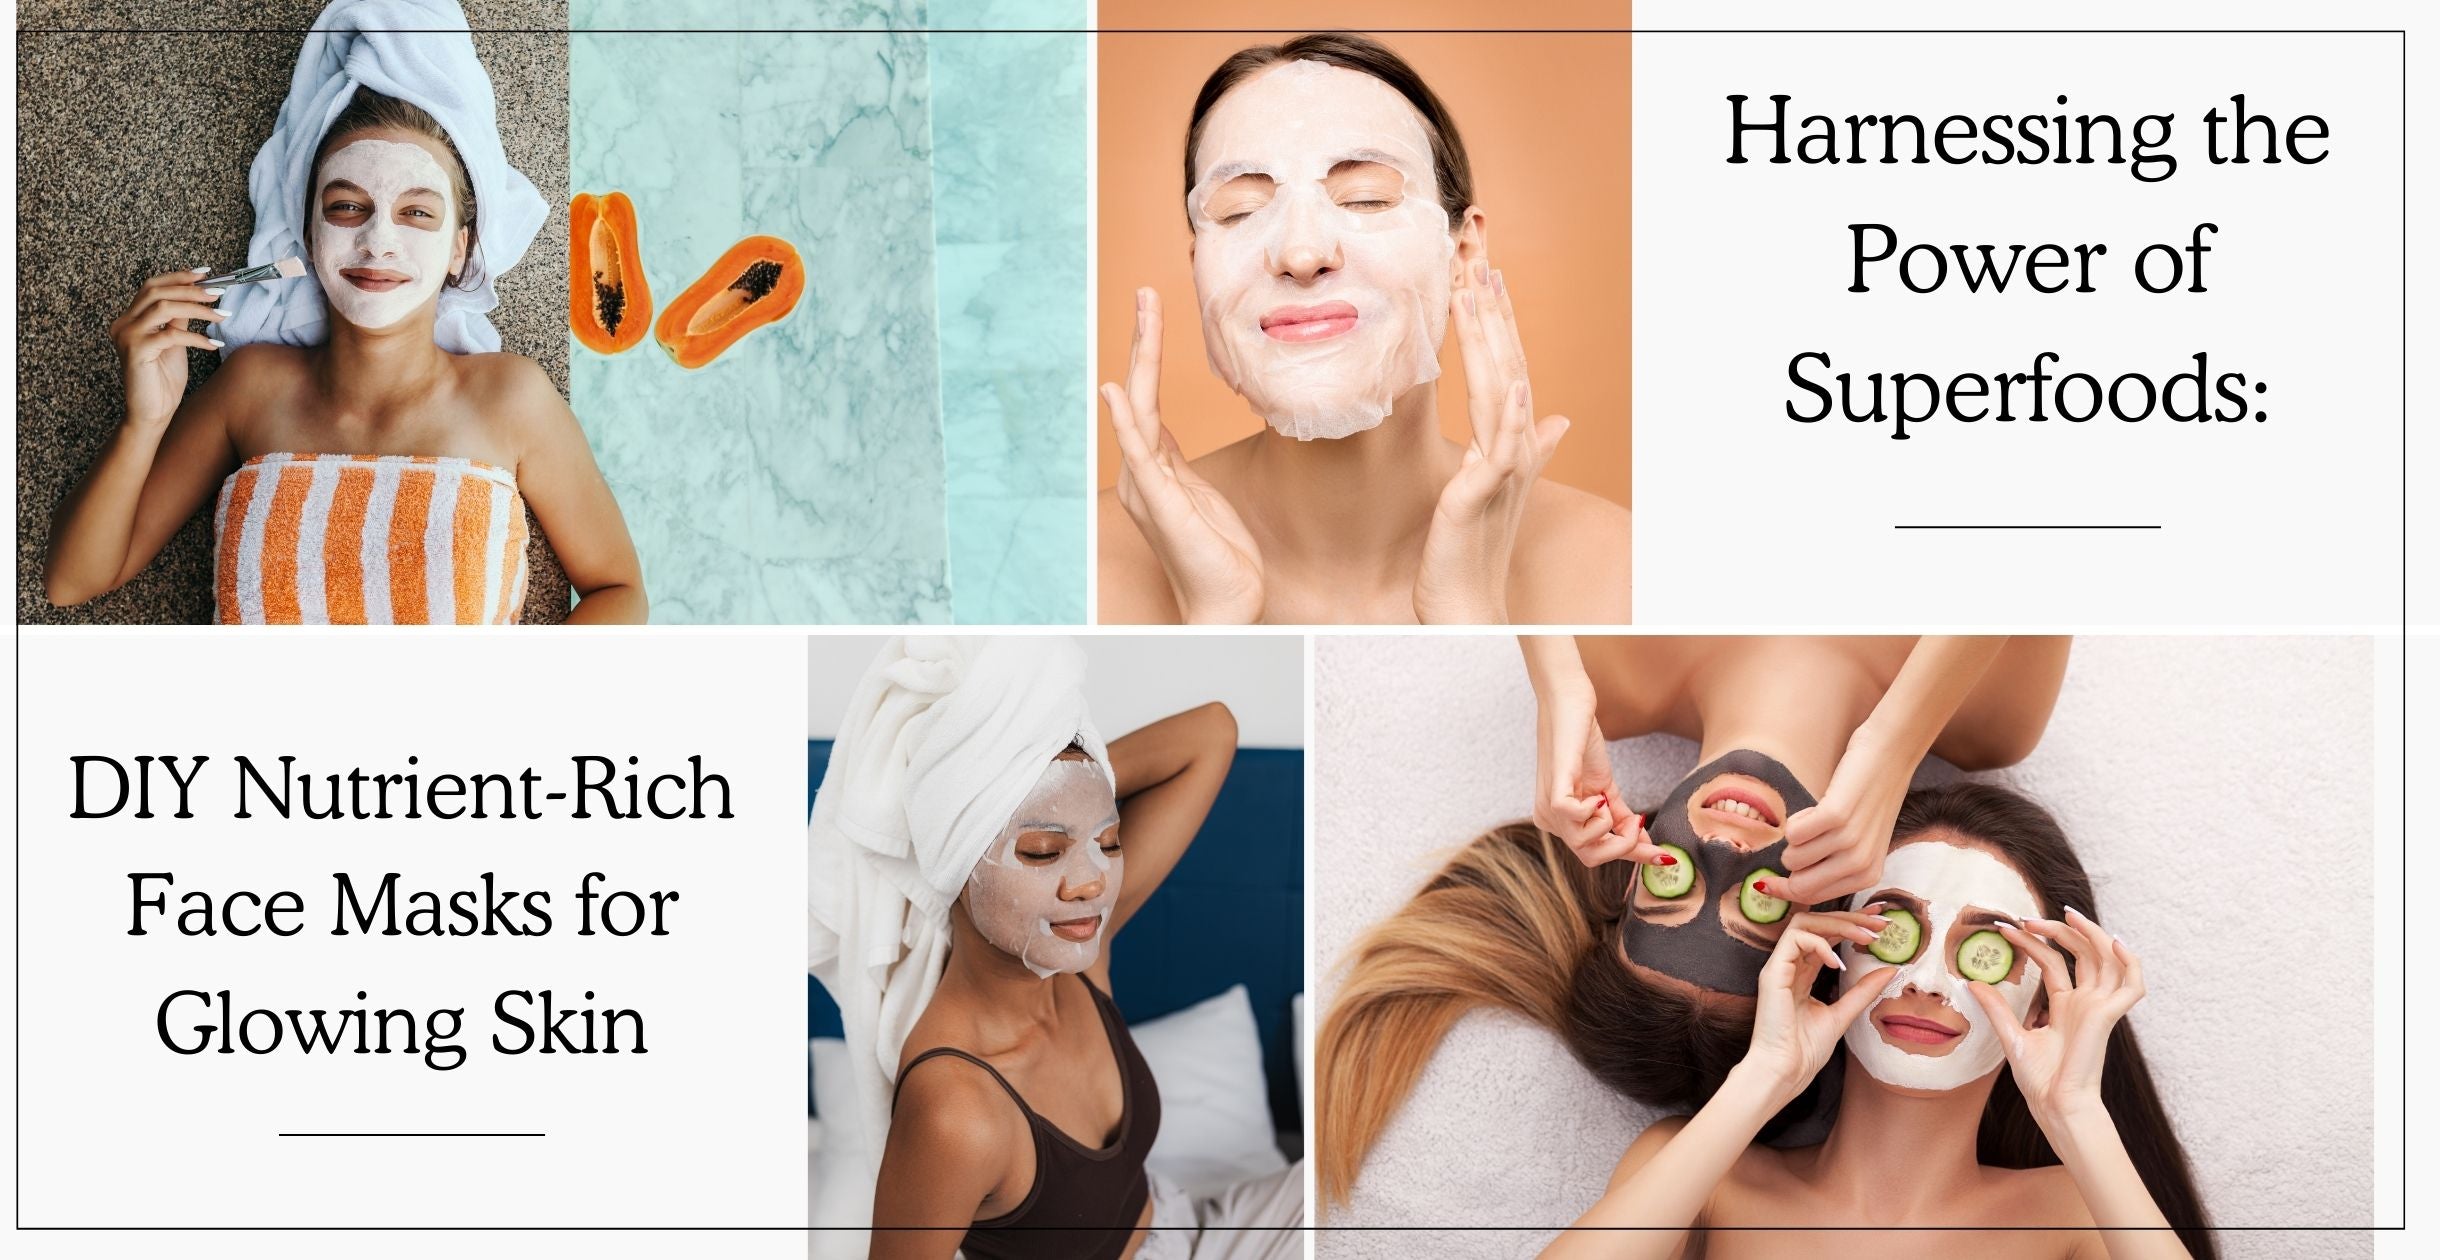 Harnessing the Power of Superfoods: DIY Nutrient-Rich Face Masks for Glowing Skin